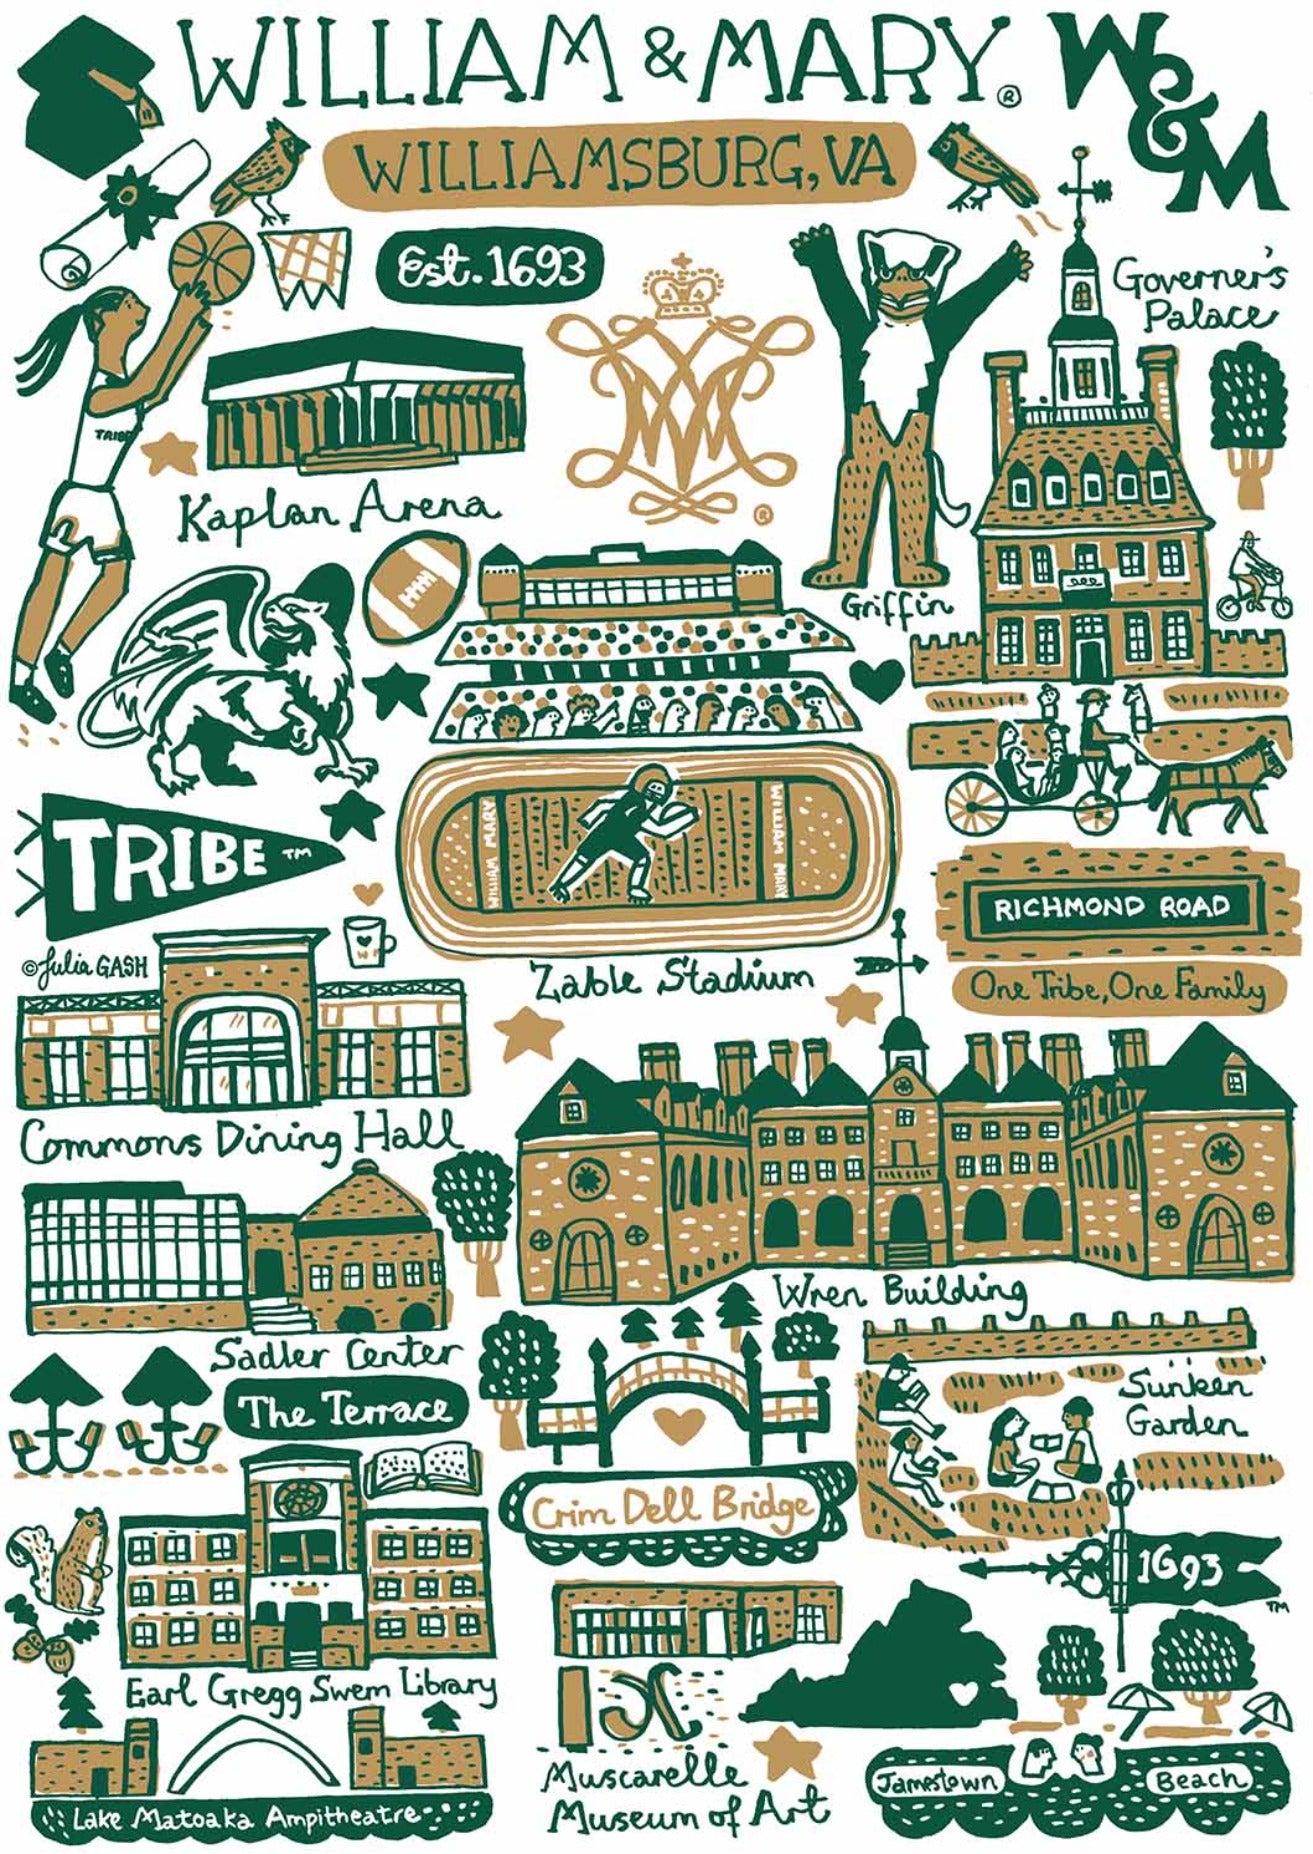 William and Mary University by Julia Gash